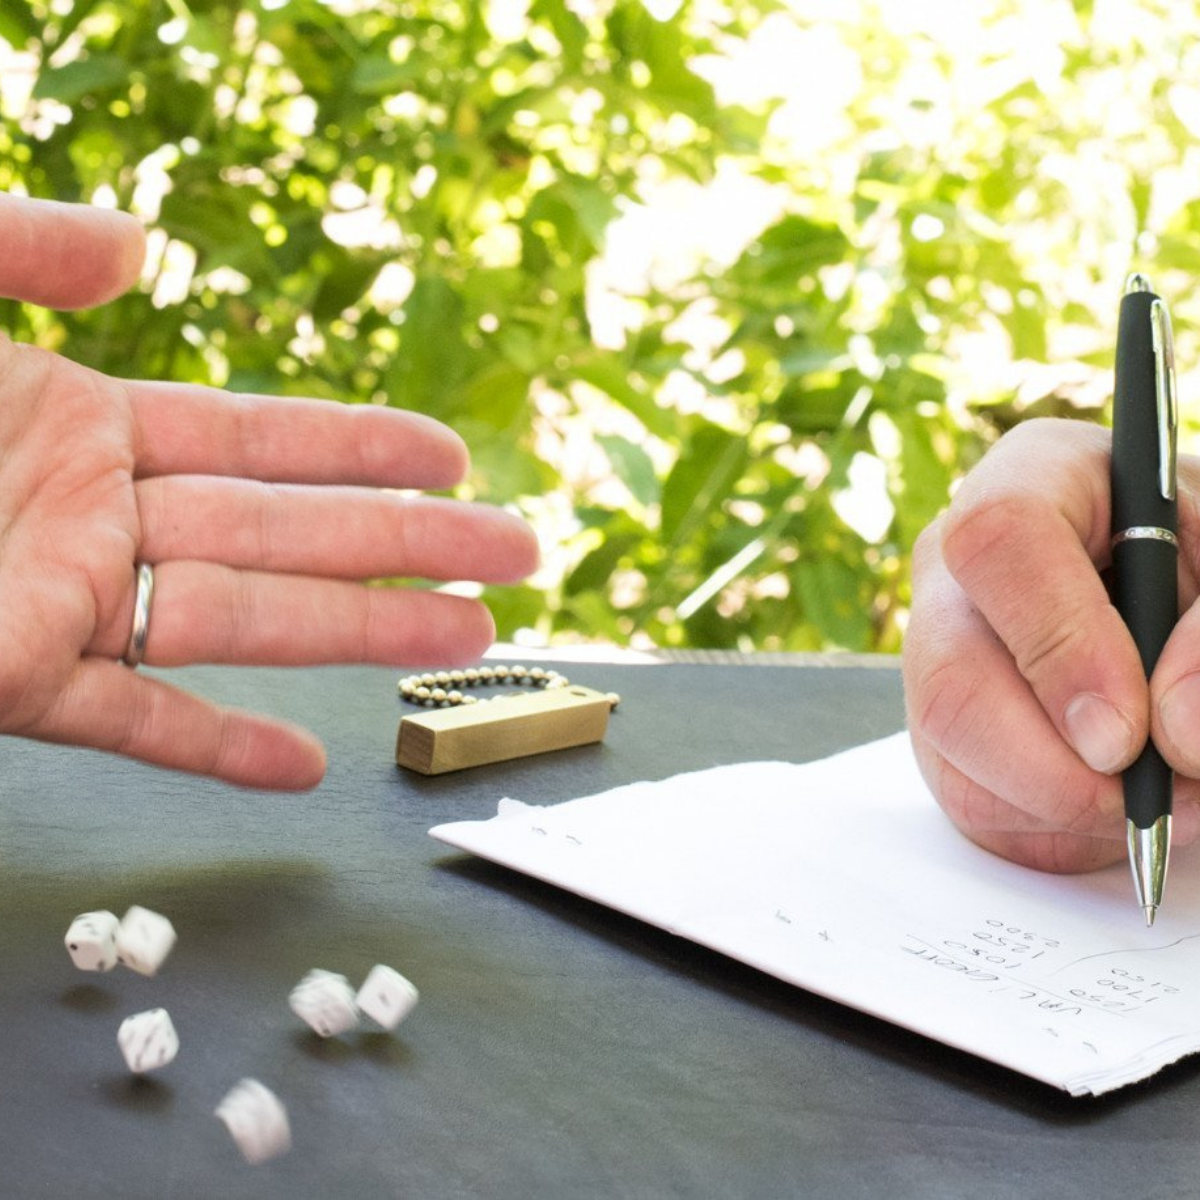 Two people playing dice on a summery day with green bushes in the background. One person is rolling six small travel dice and the other person is keeping score with a pen and paper. The brass storage tube is on the table.